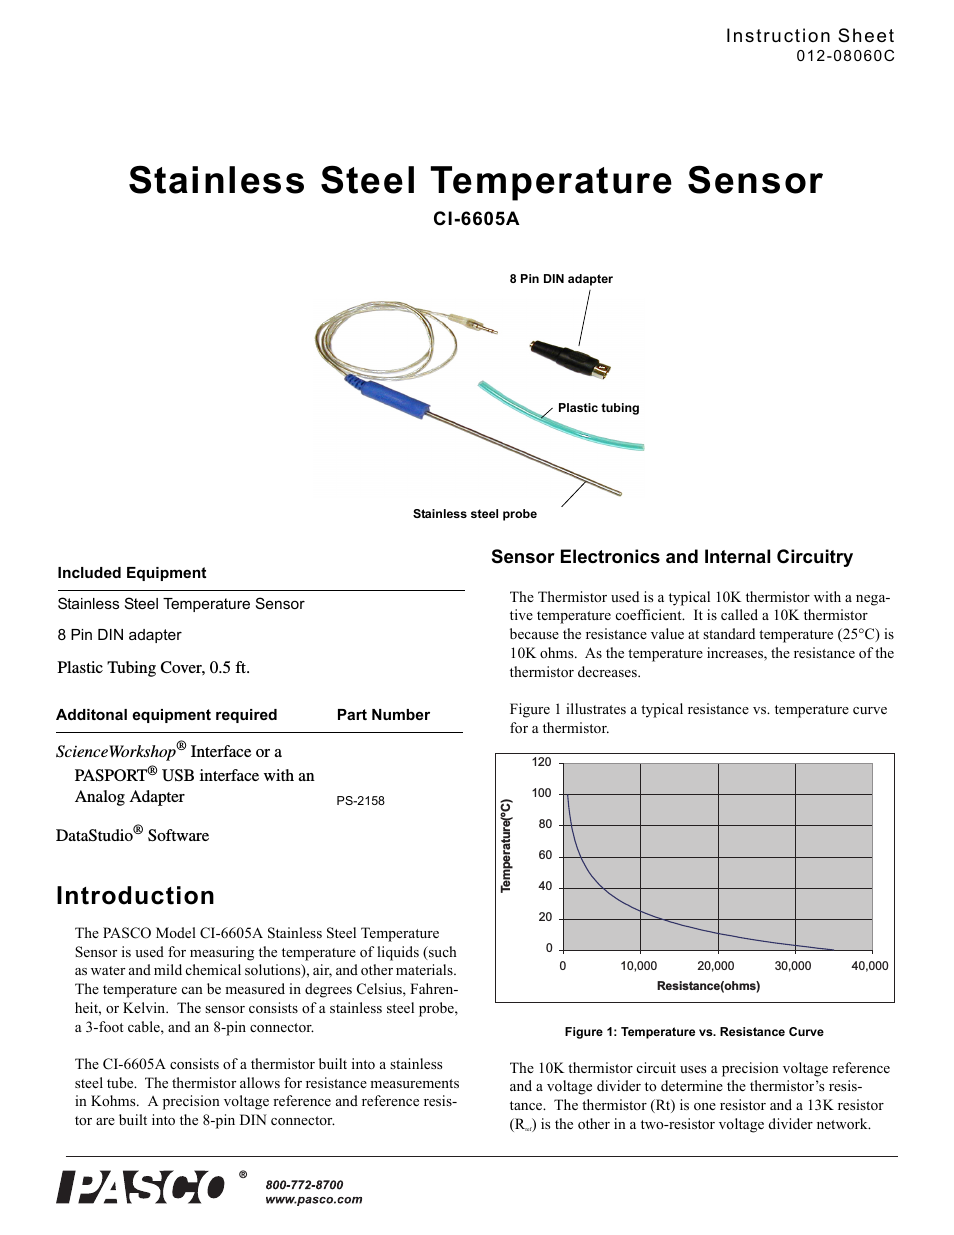 CI-6605A Stainless Steel Temperature Sensor